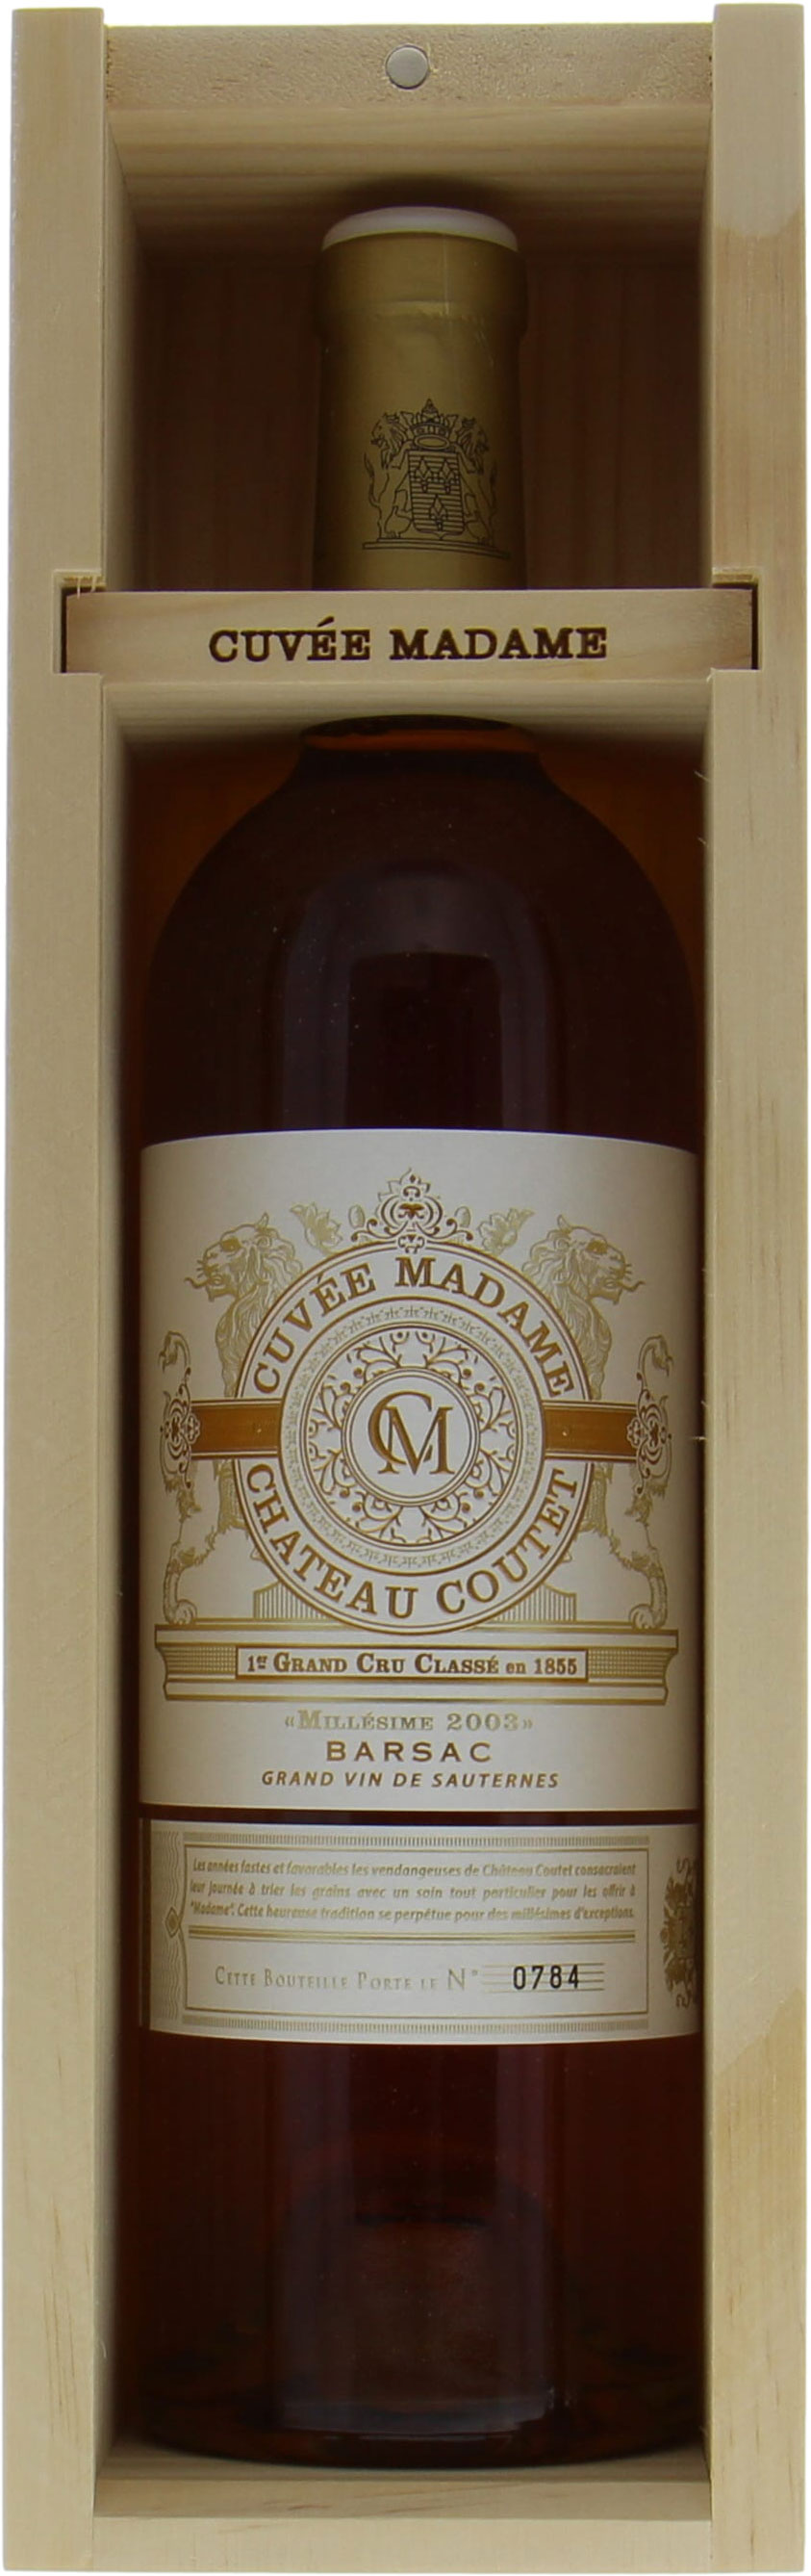 Chateau Coutet - Cuvee Madame 2003 Perfect